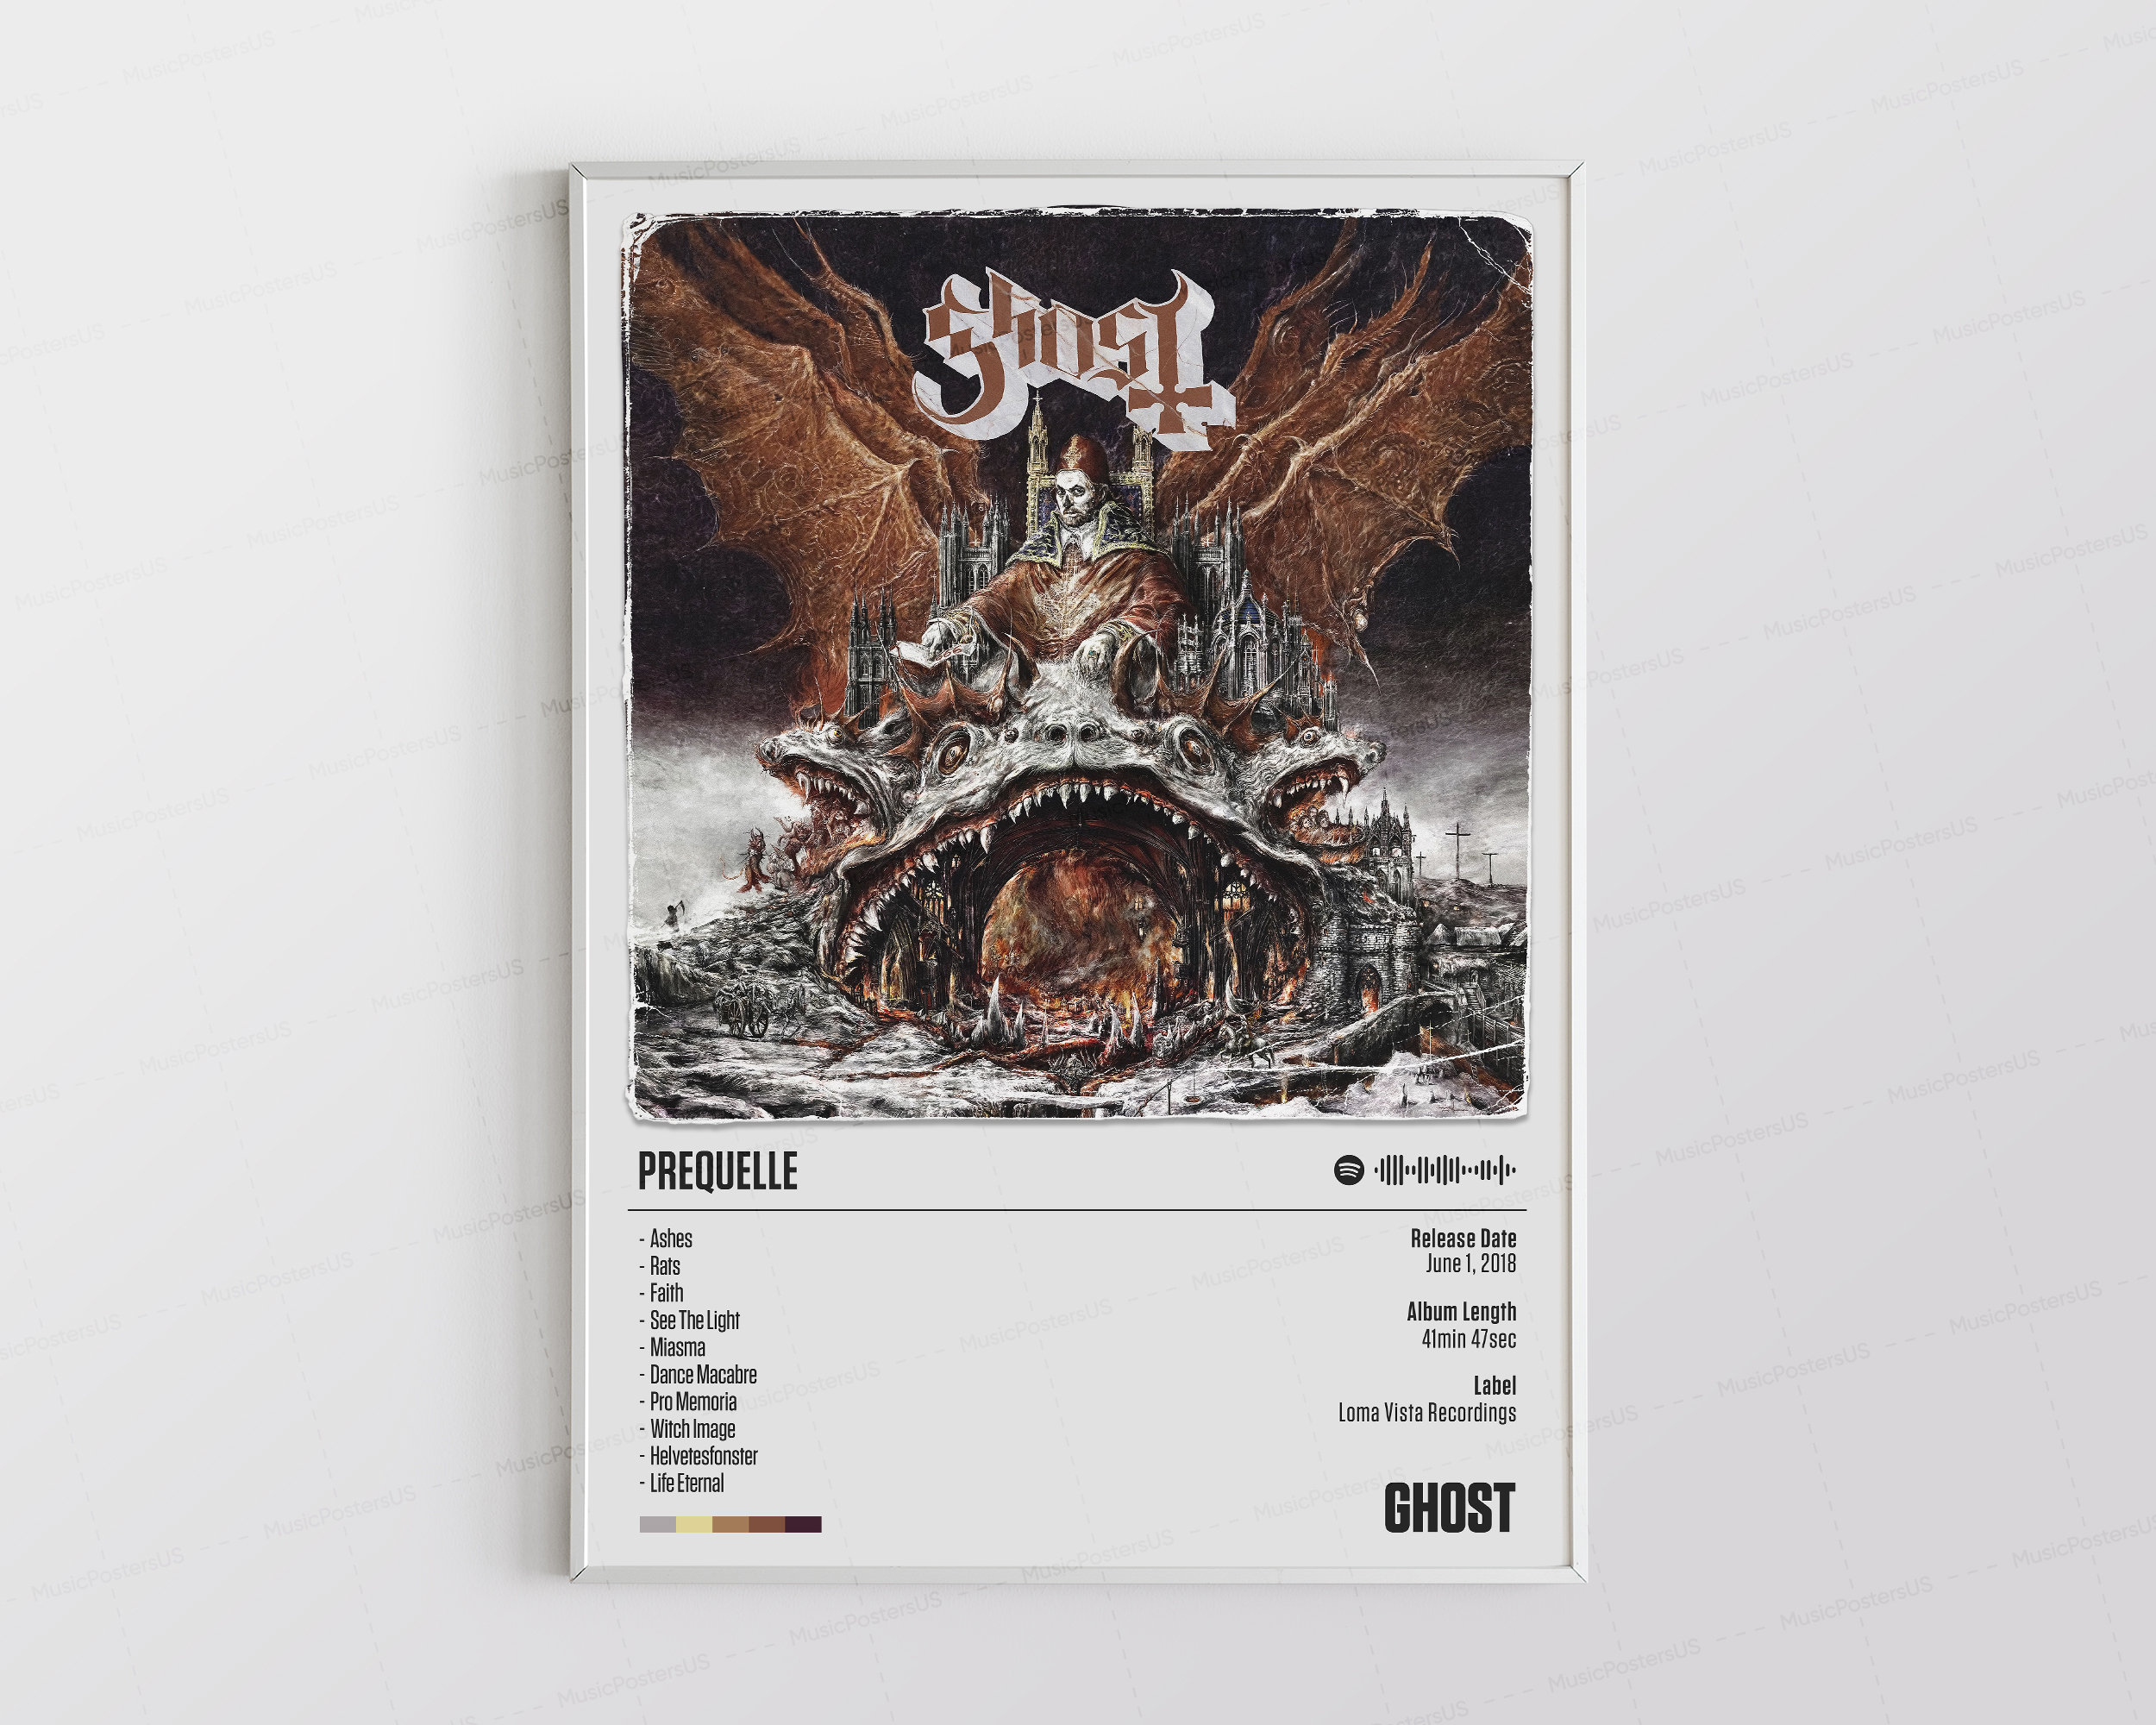 Discover Ghost Posters, Prequelle Poster, Album Cover Poster, Ghost BC Poster